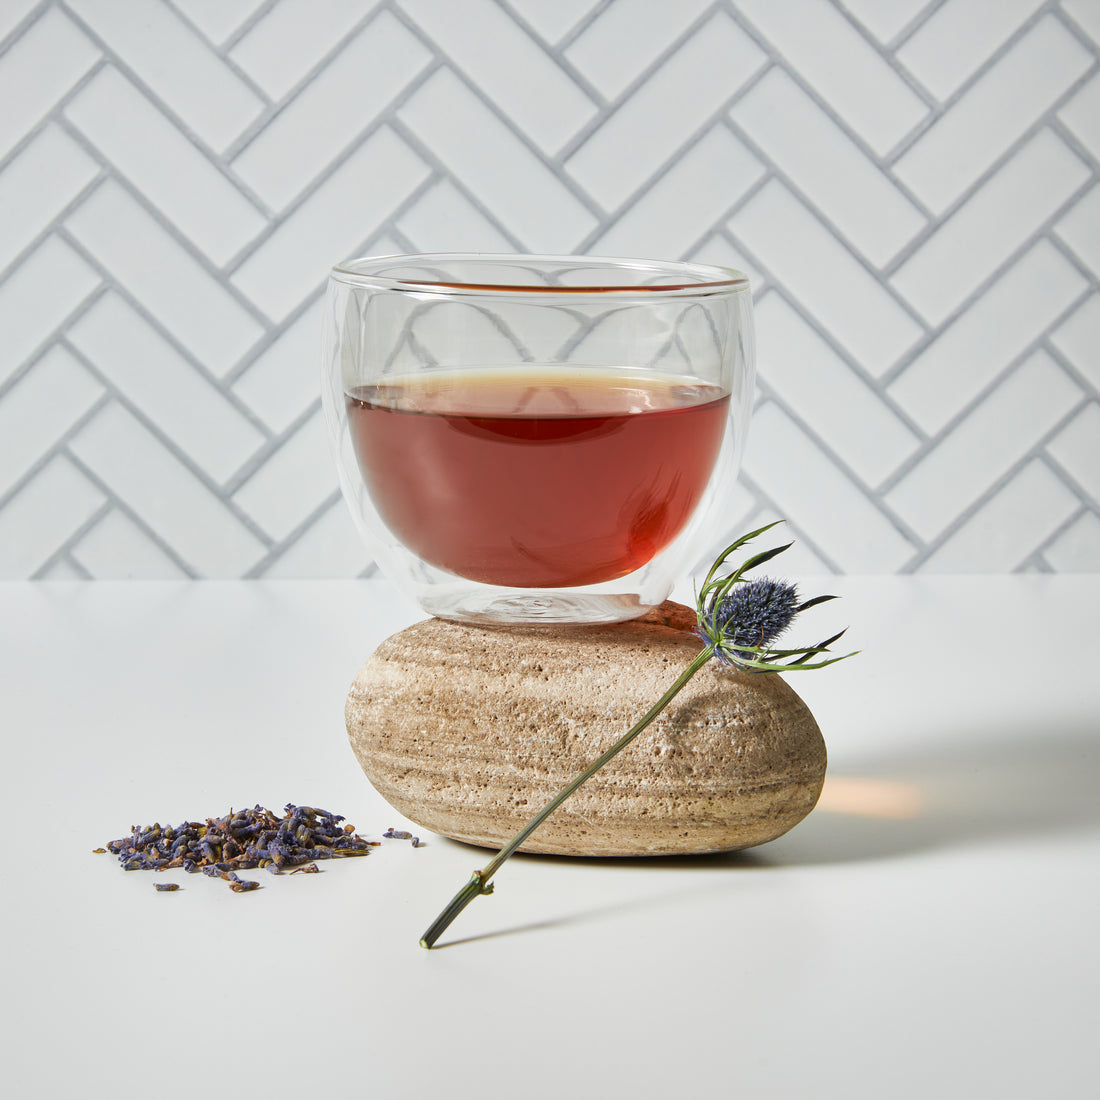 What Are The Benefits of Drinking Herbal Tea - Firebelly Tea